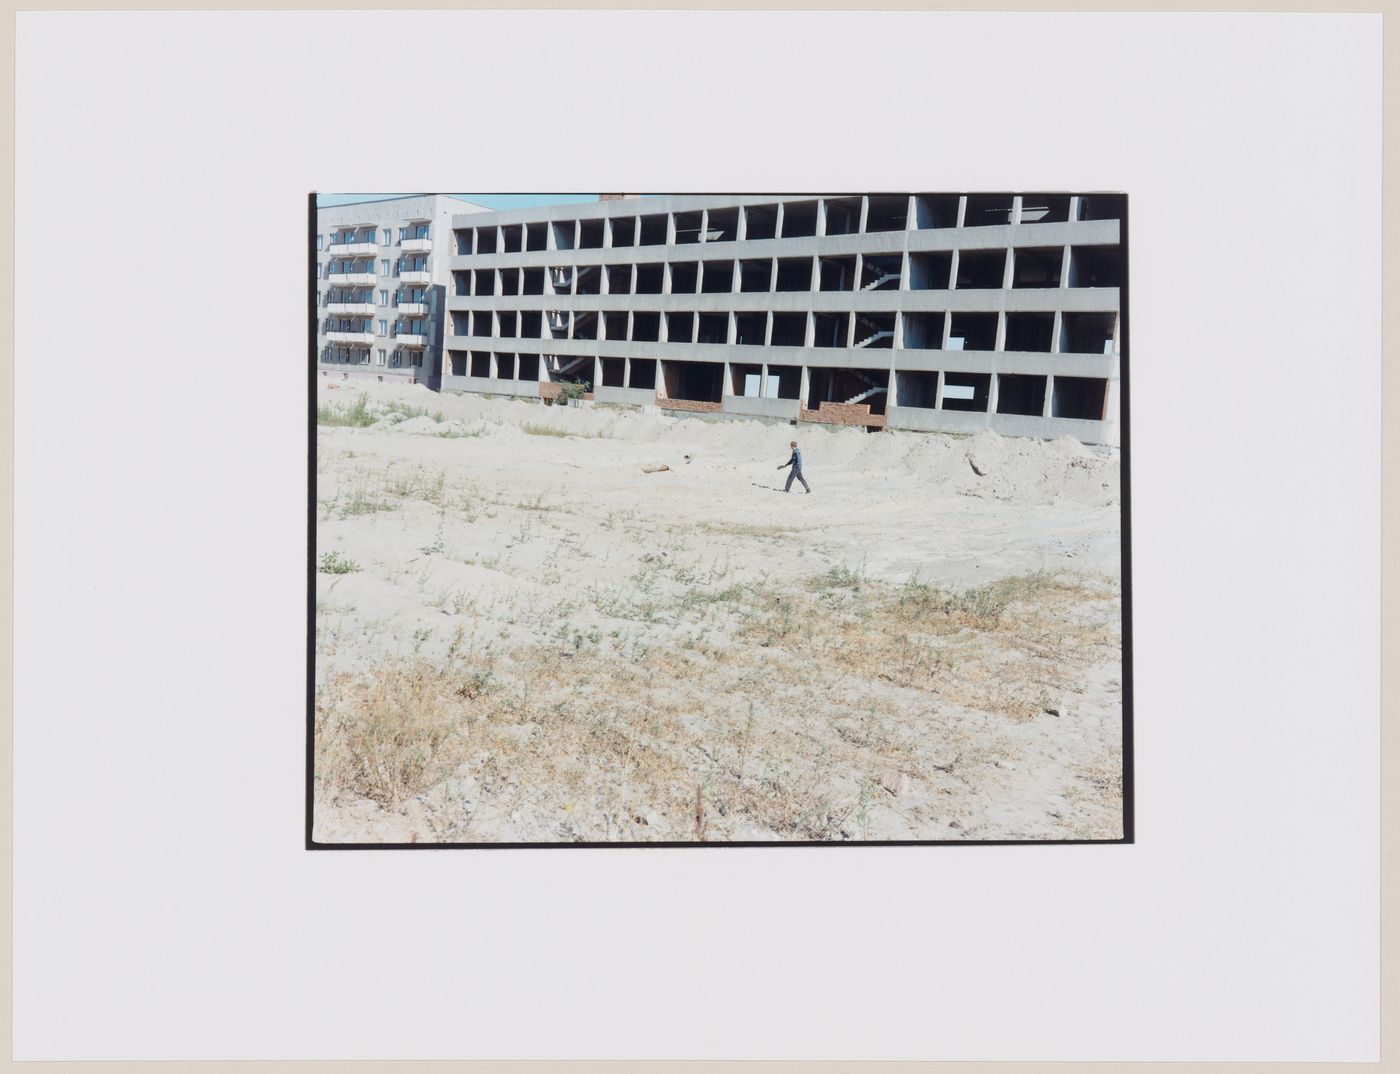 View of a building under construction, a vacant lot, and a person, Kaliningrad, Kaliningradskaia oblast', Russia (from the series "In between cities")